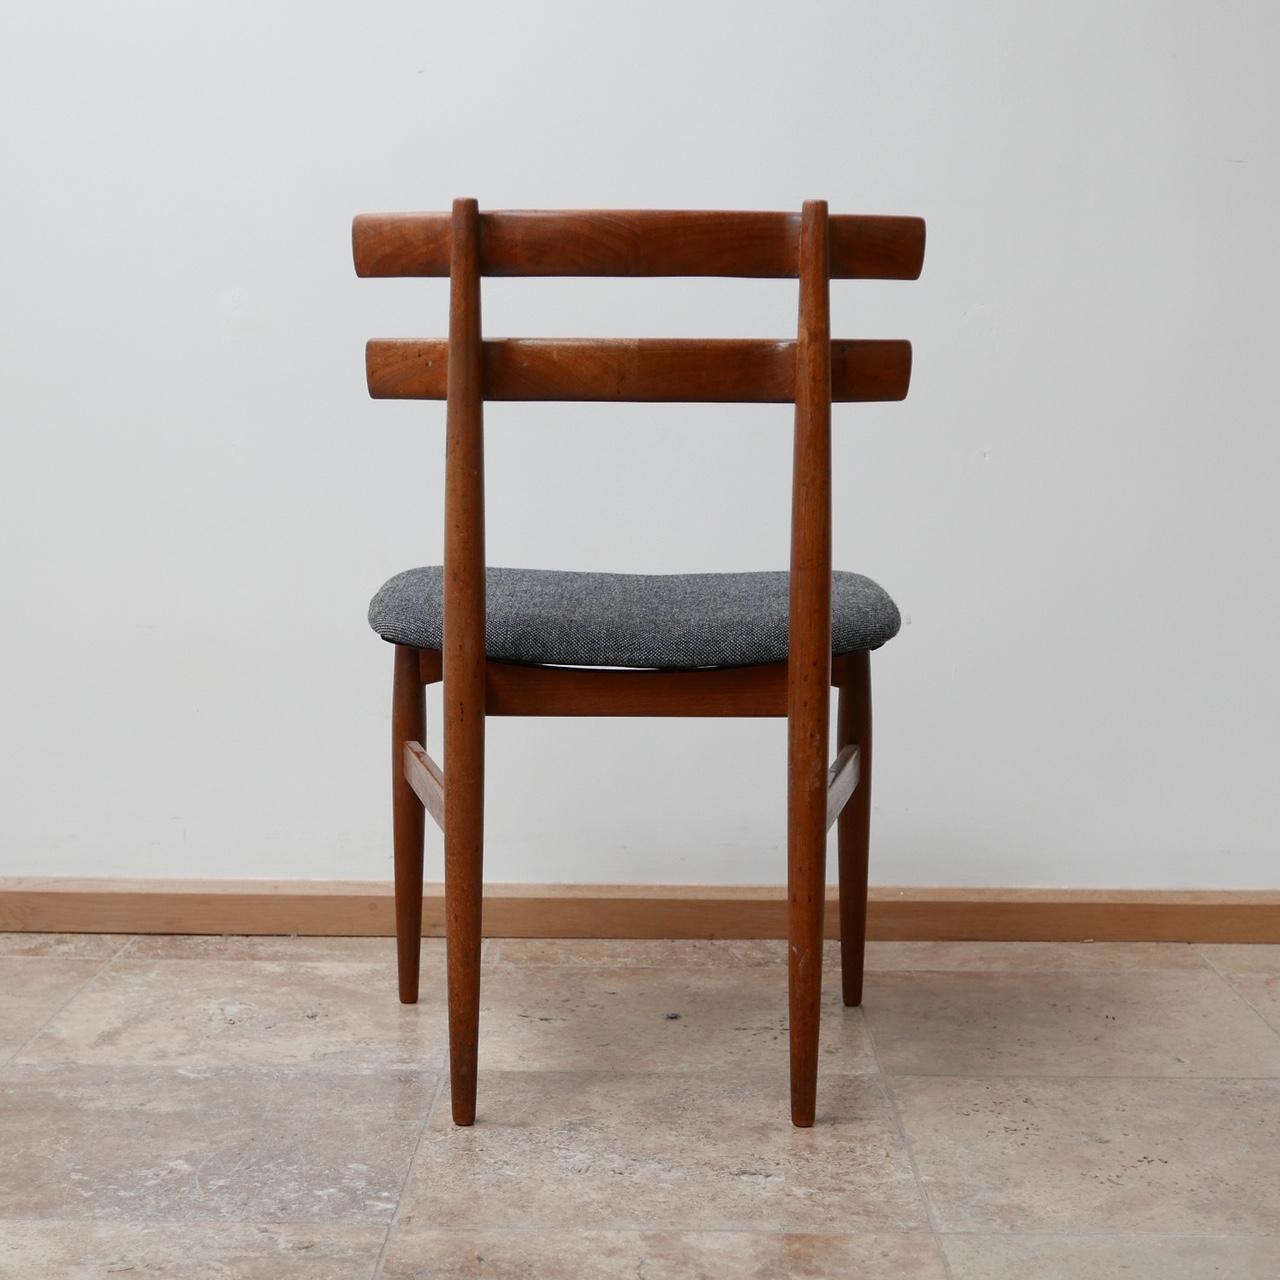 Teak Midcentury Dining Chairs by Poul Hundevad 2